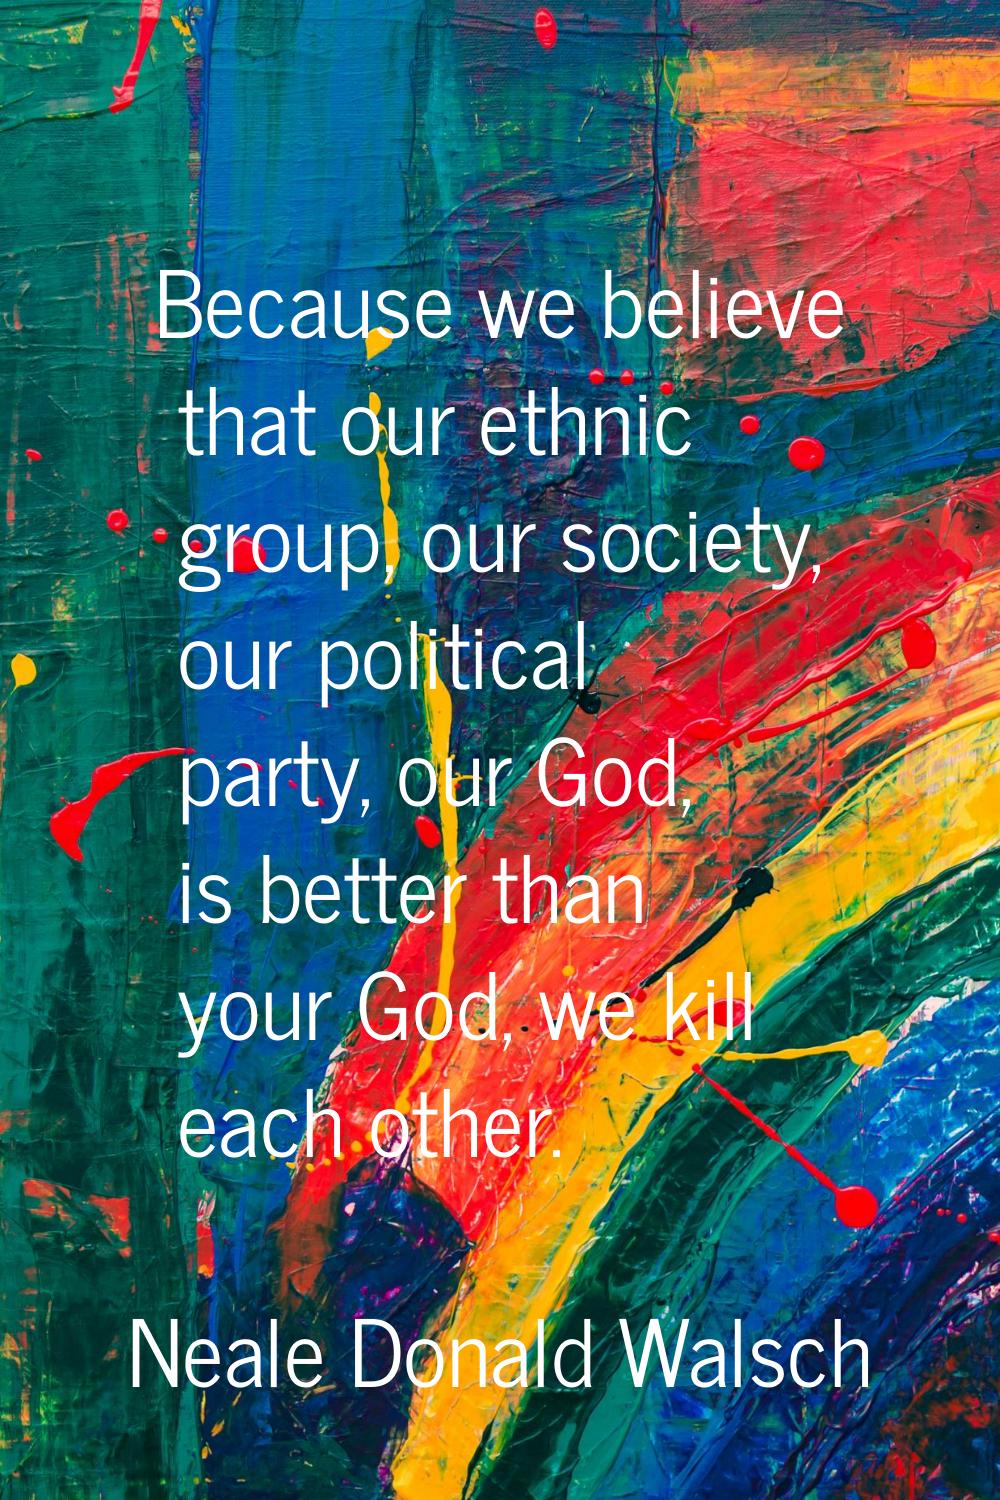 Because we believe that our ethnic group, our society, our political party, our God, is better than